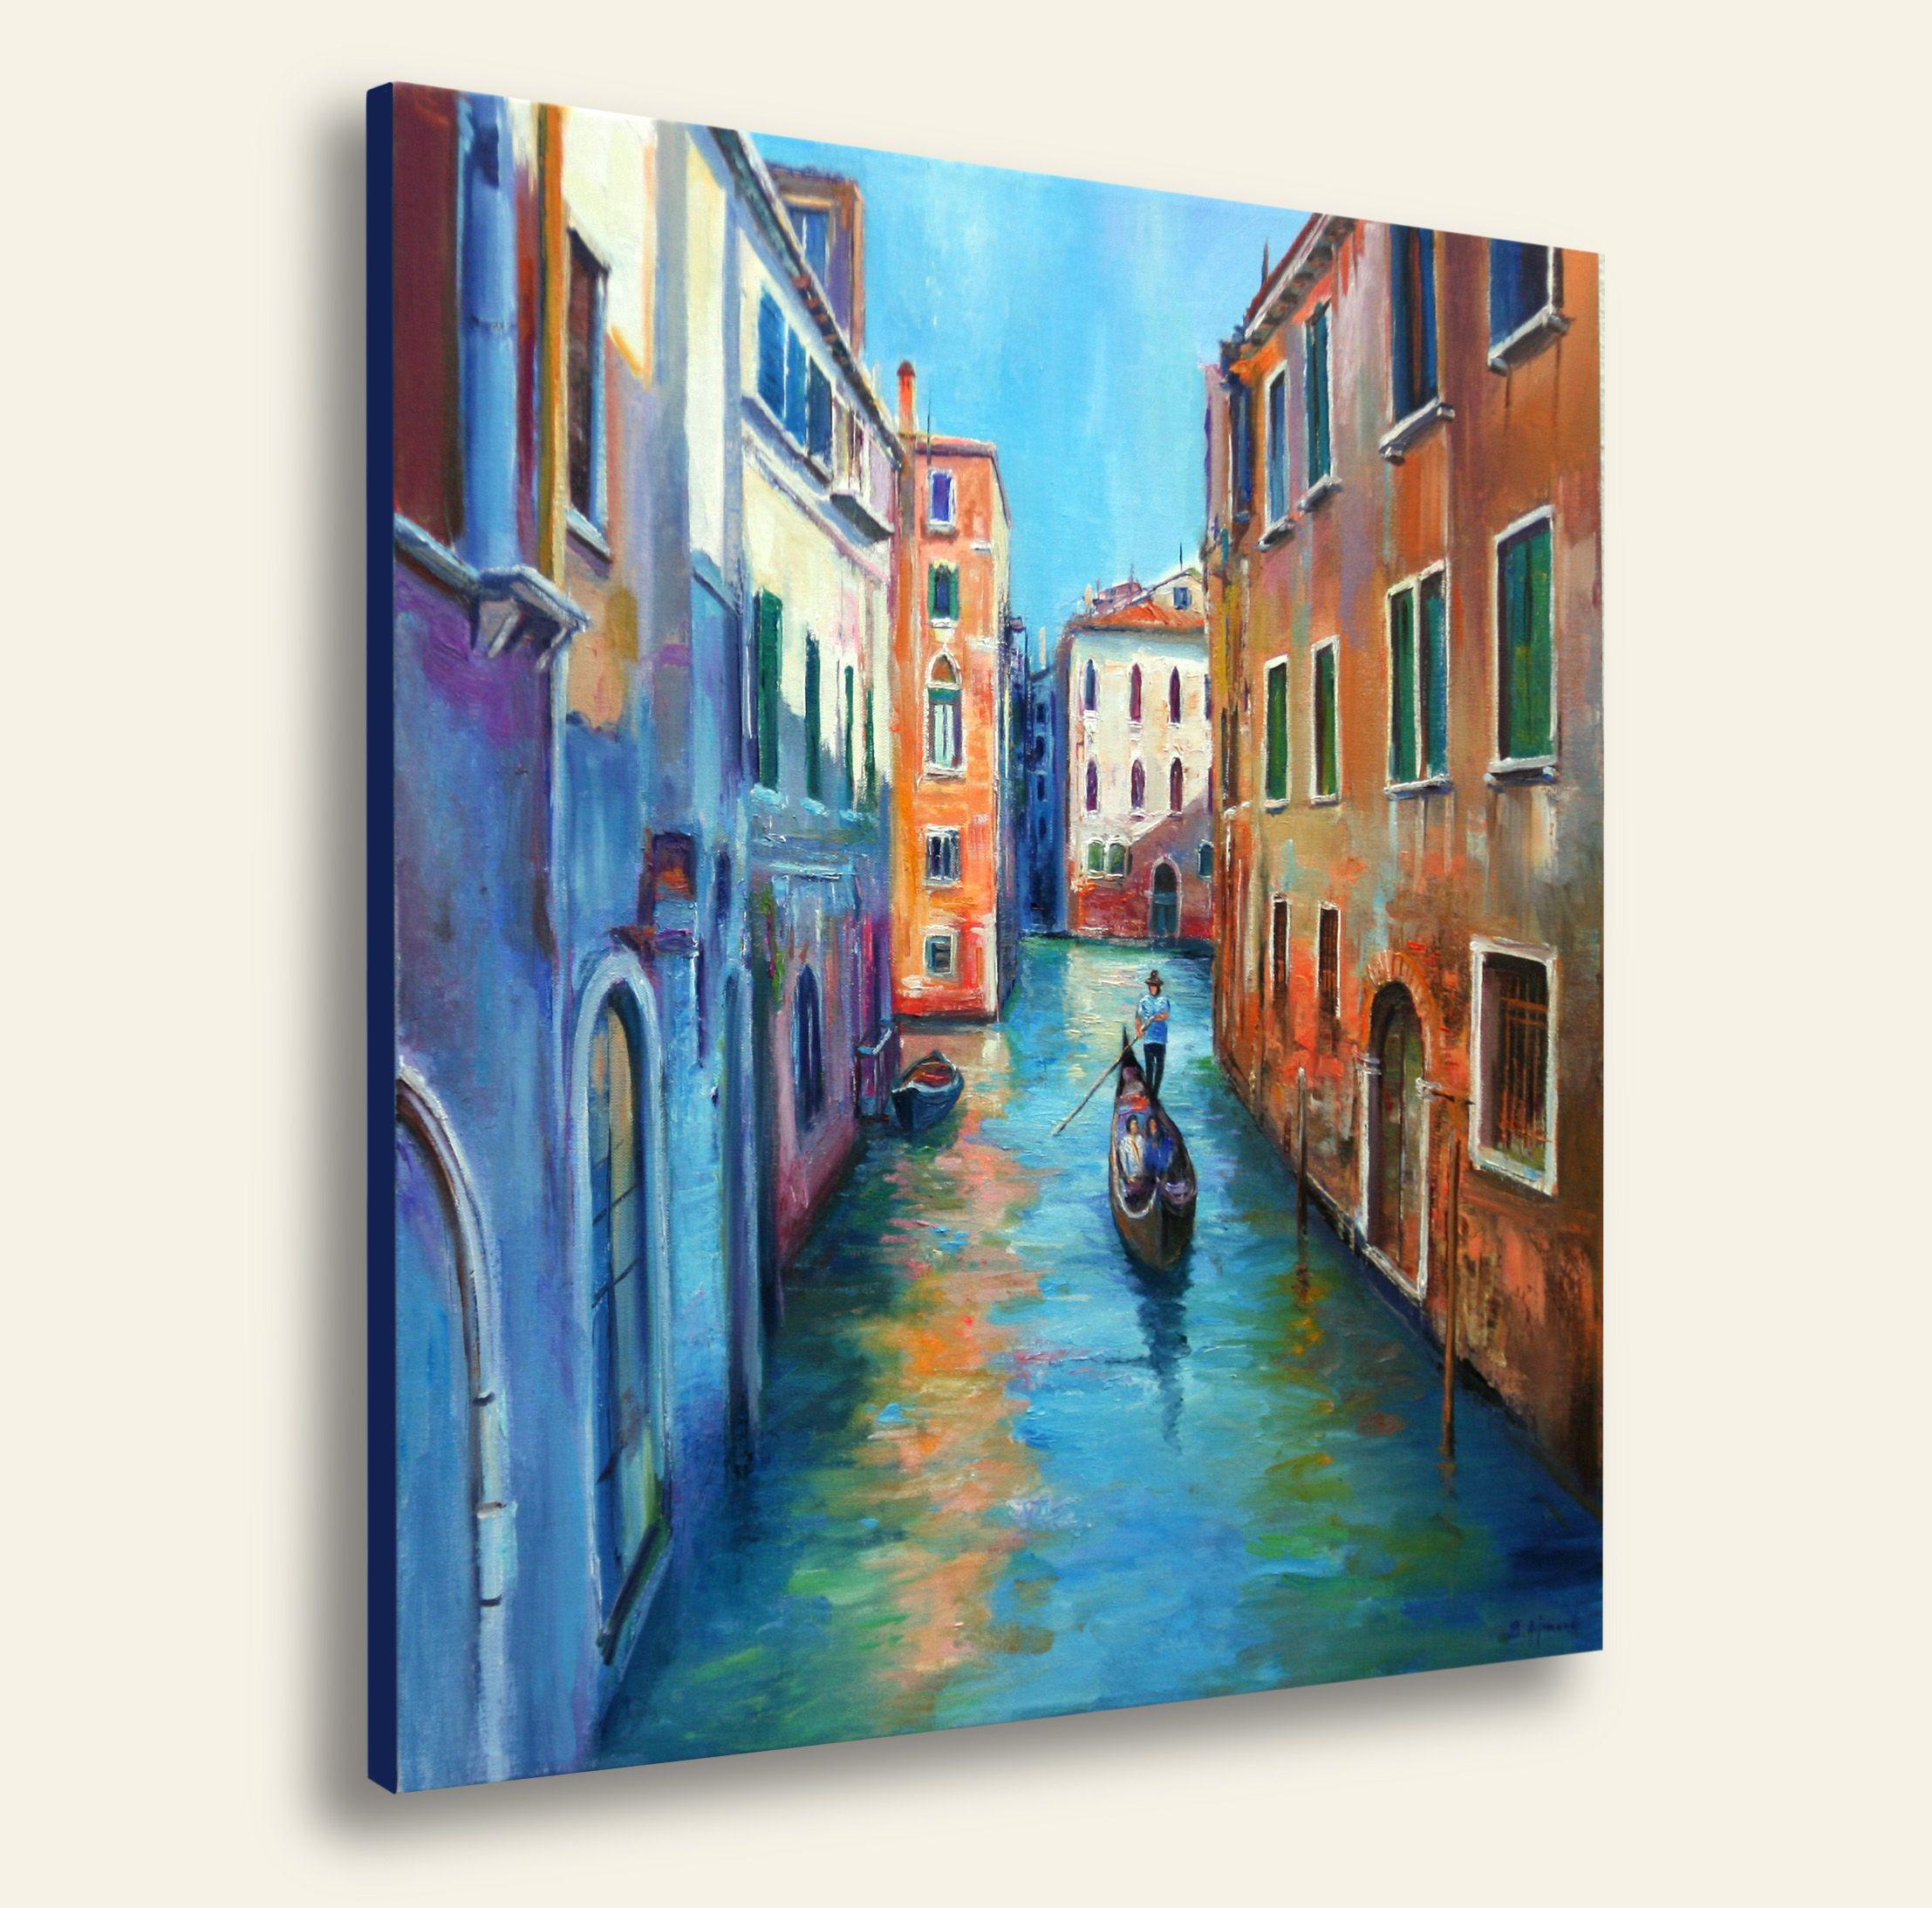 The Colors of Venice, Painting, Oil on Canvas 4